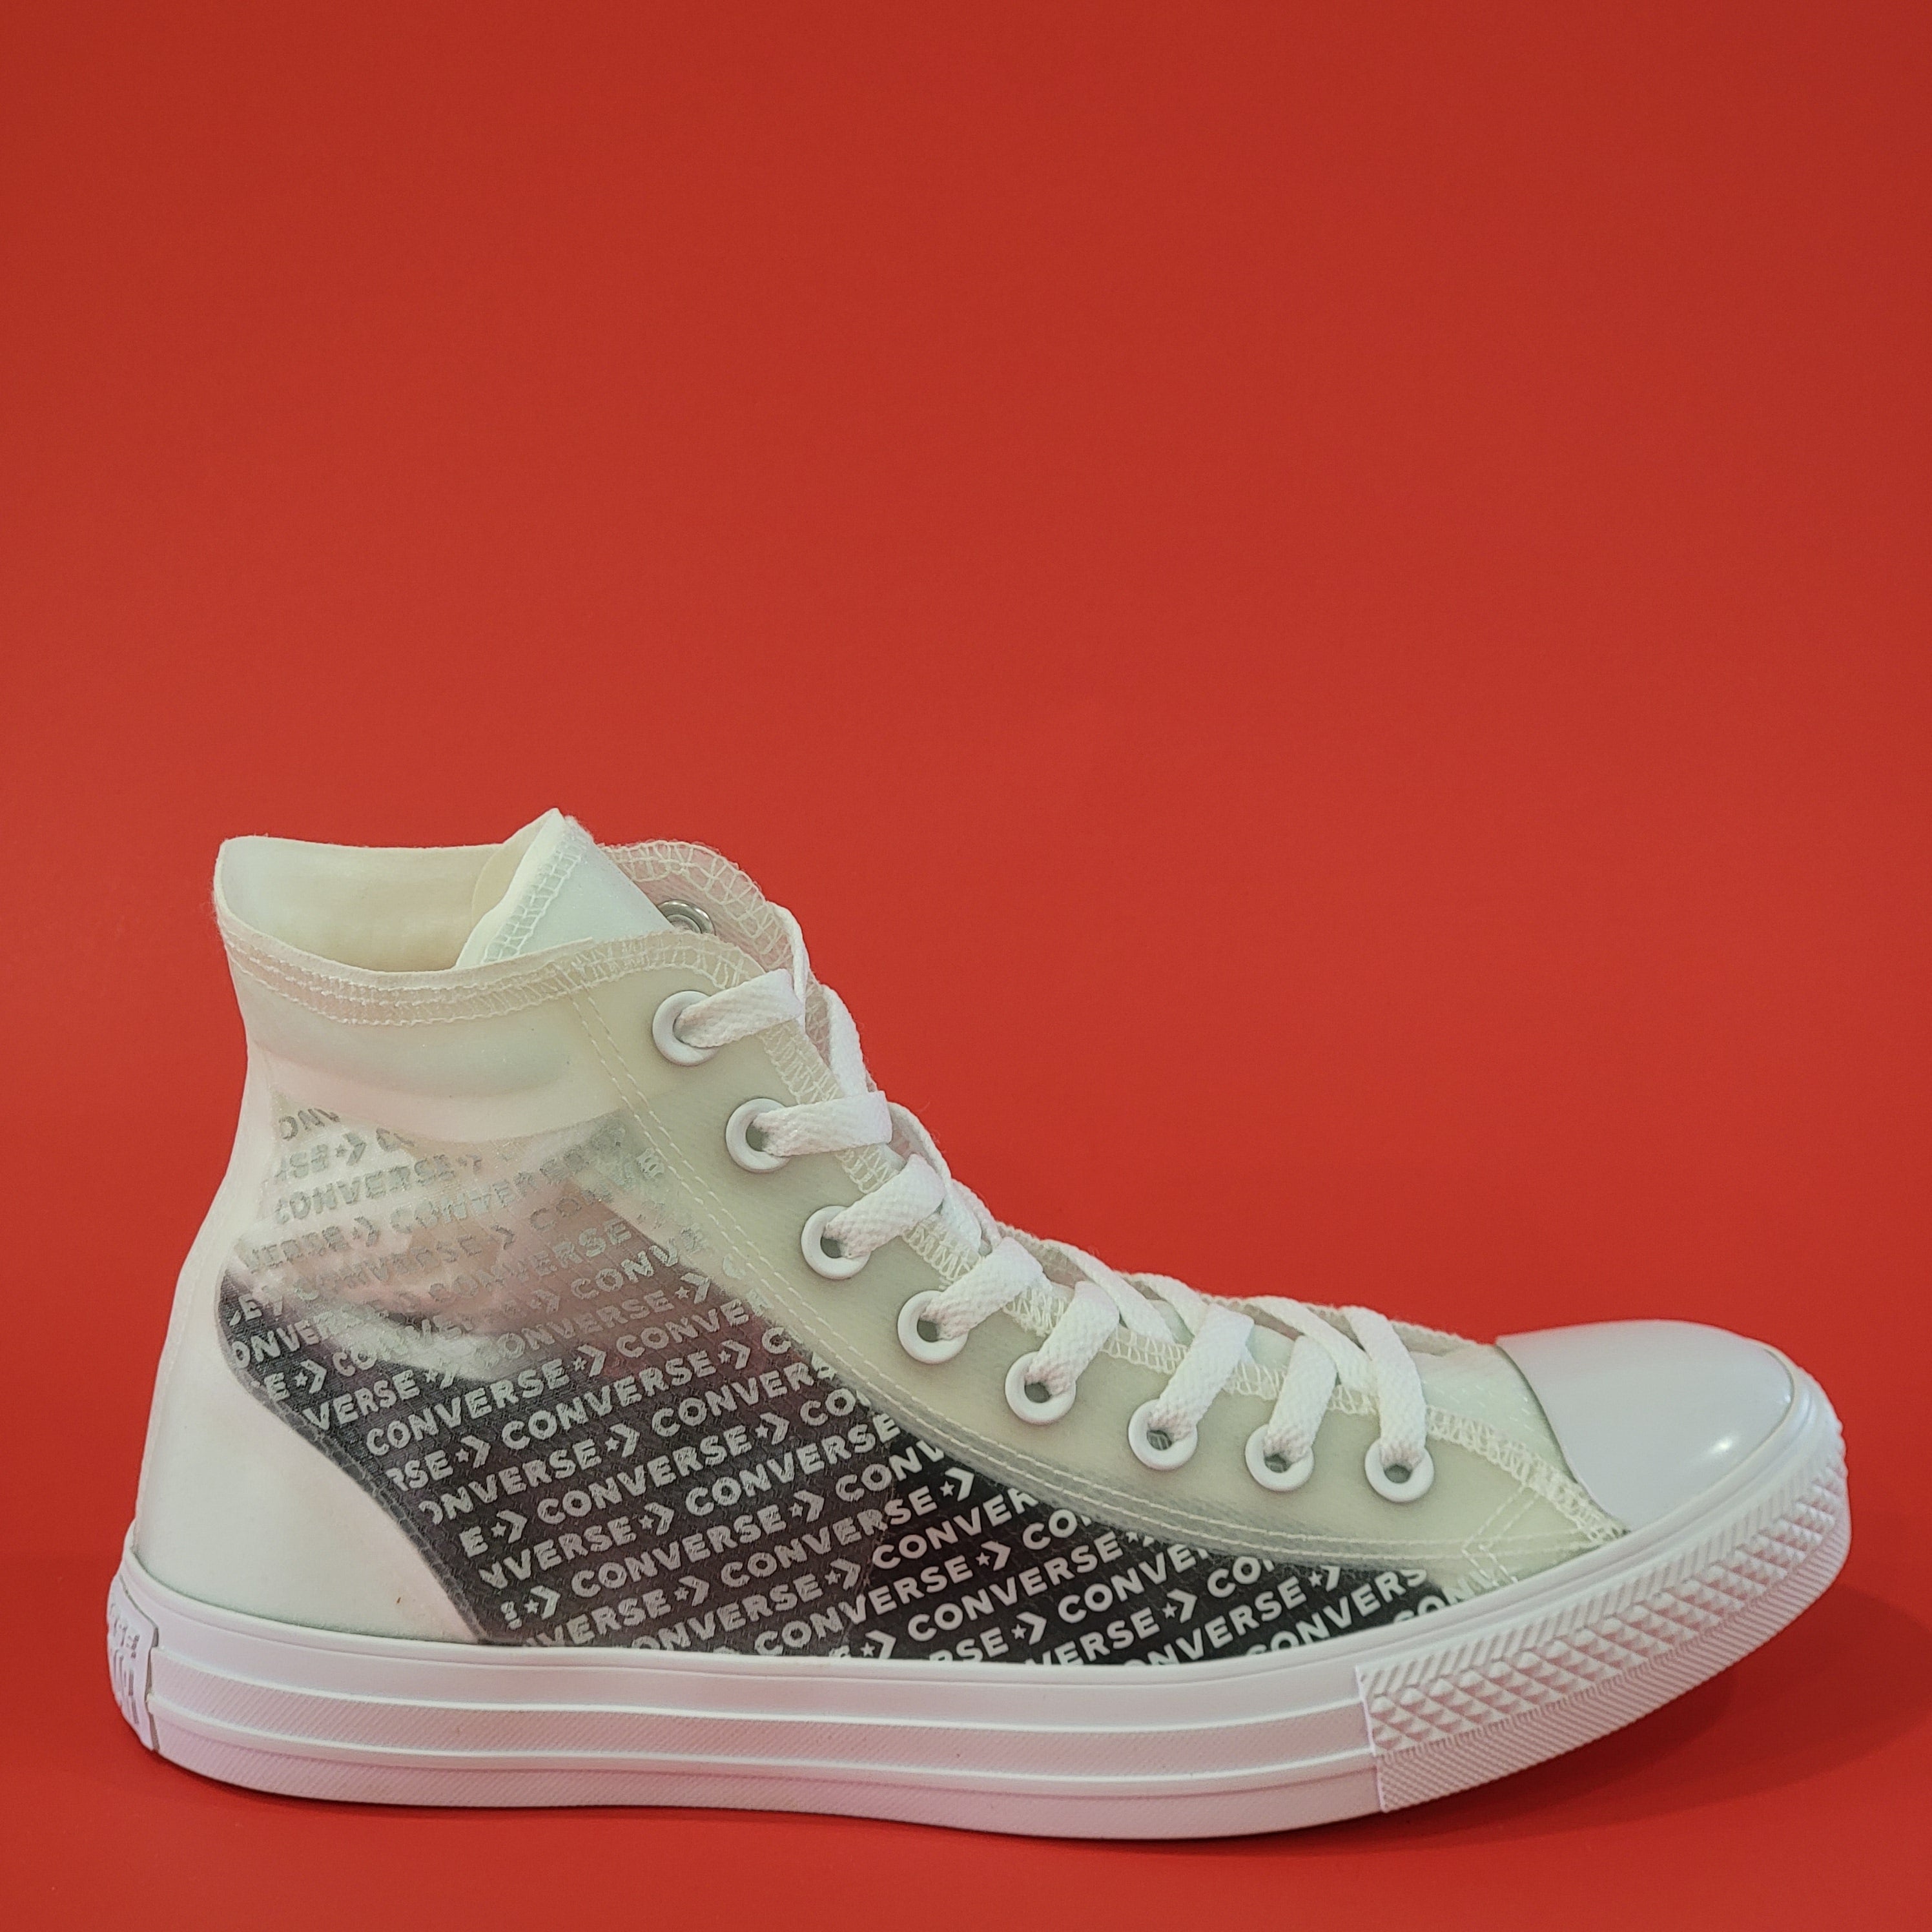 Converse CTAS High Top 'Translucent' Sneakers 165609C NWT